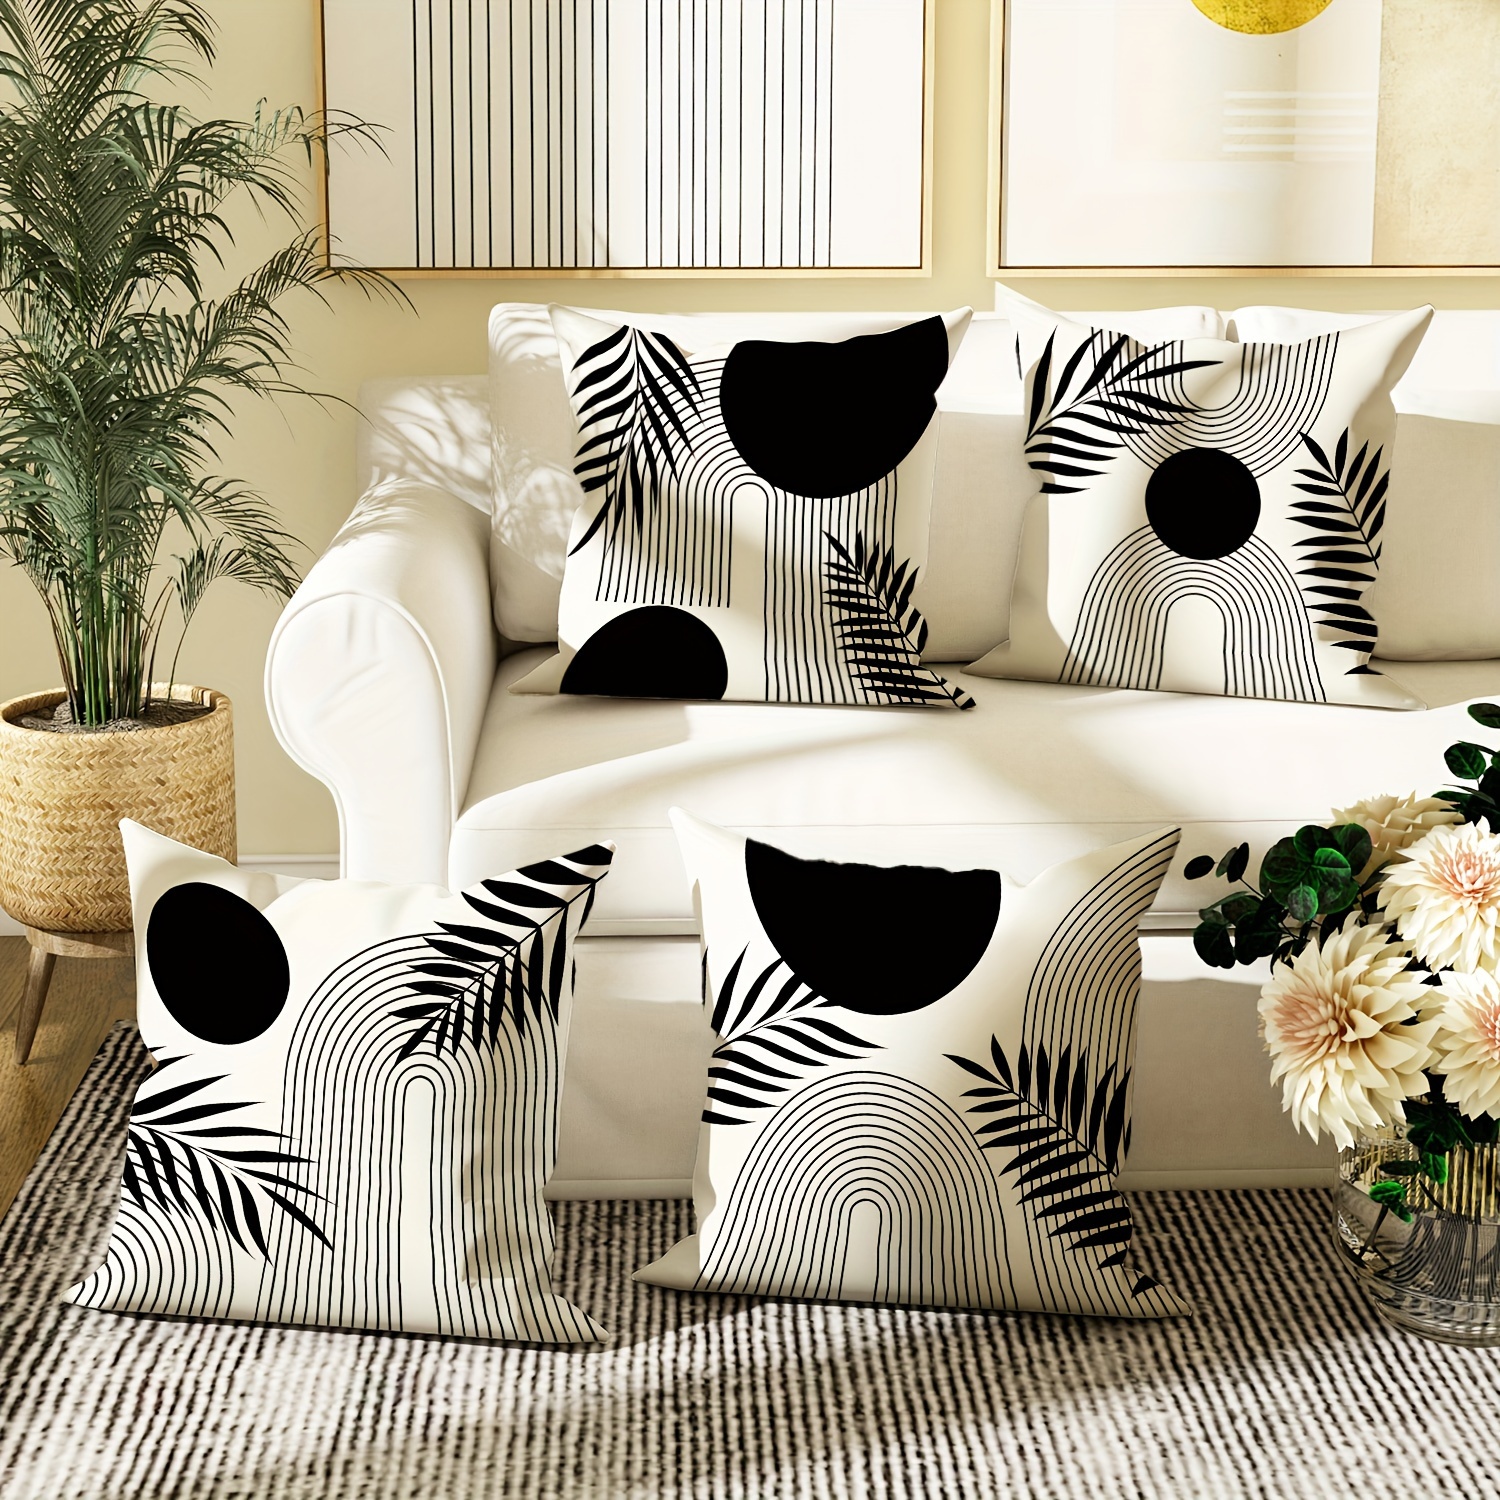 

4 Pcs Velvet Throw Pillow Covers: Geometric Black & White Bohemian Modern Decorative Pillowcases - 18in X 18in, Suitable For Living Room, Bedroom, Sofa, Bed Decoration - Without Pillow Inserts